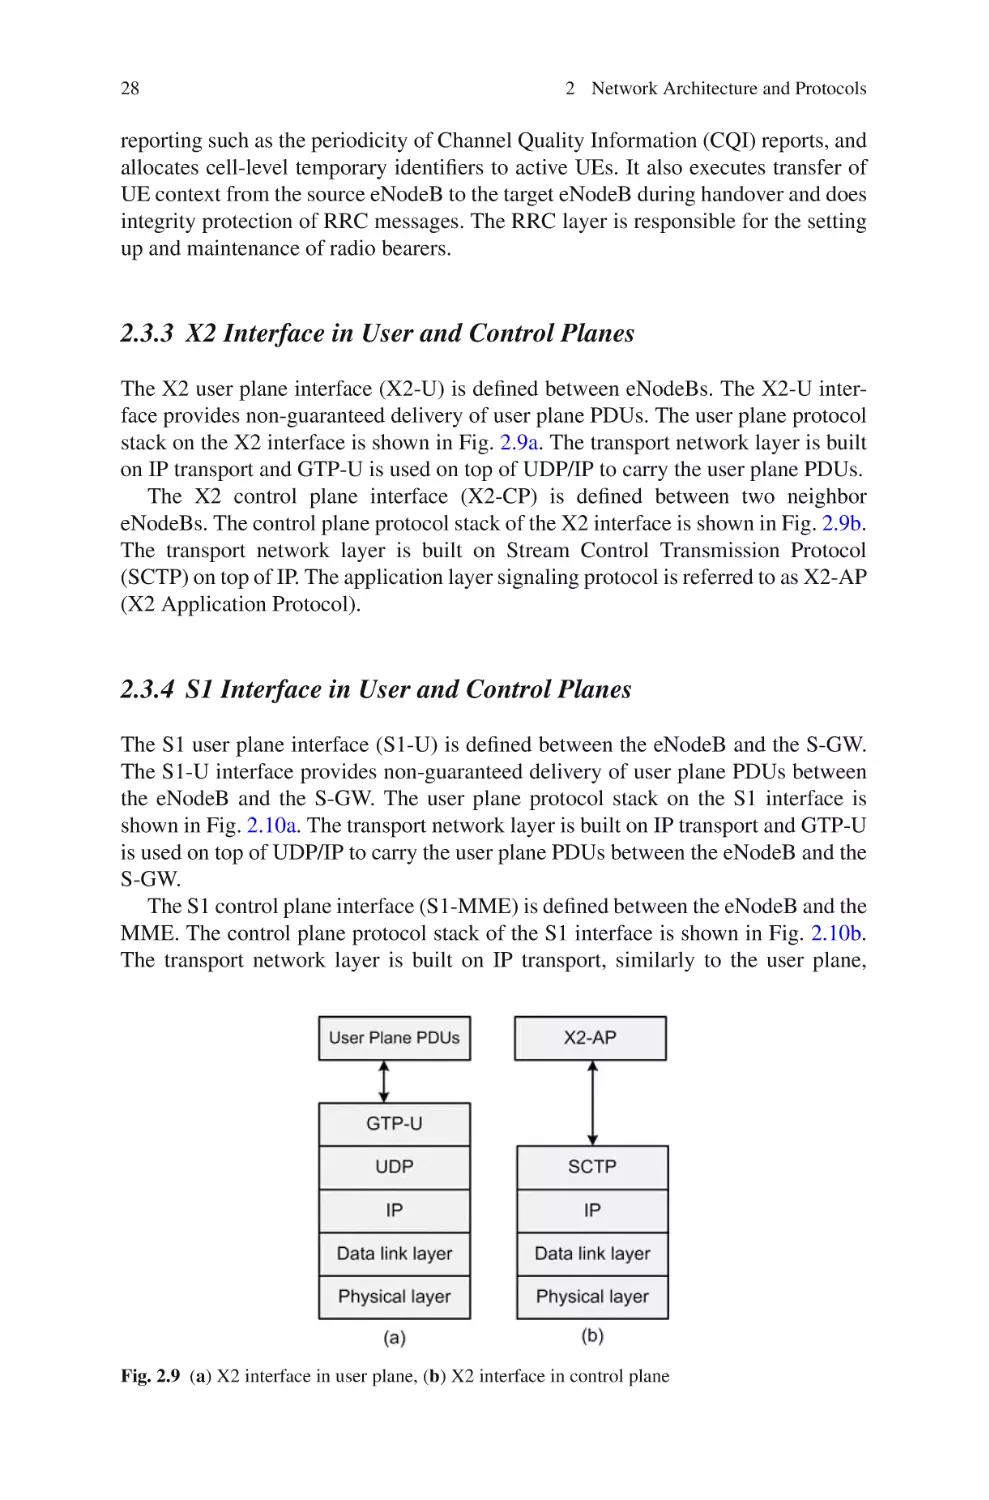 2.3.3  X2 Interface in User and Control Planes
2.3.4  S1 Interface in User and Control Planes